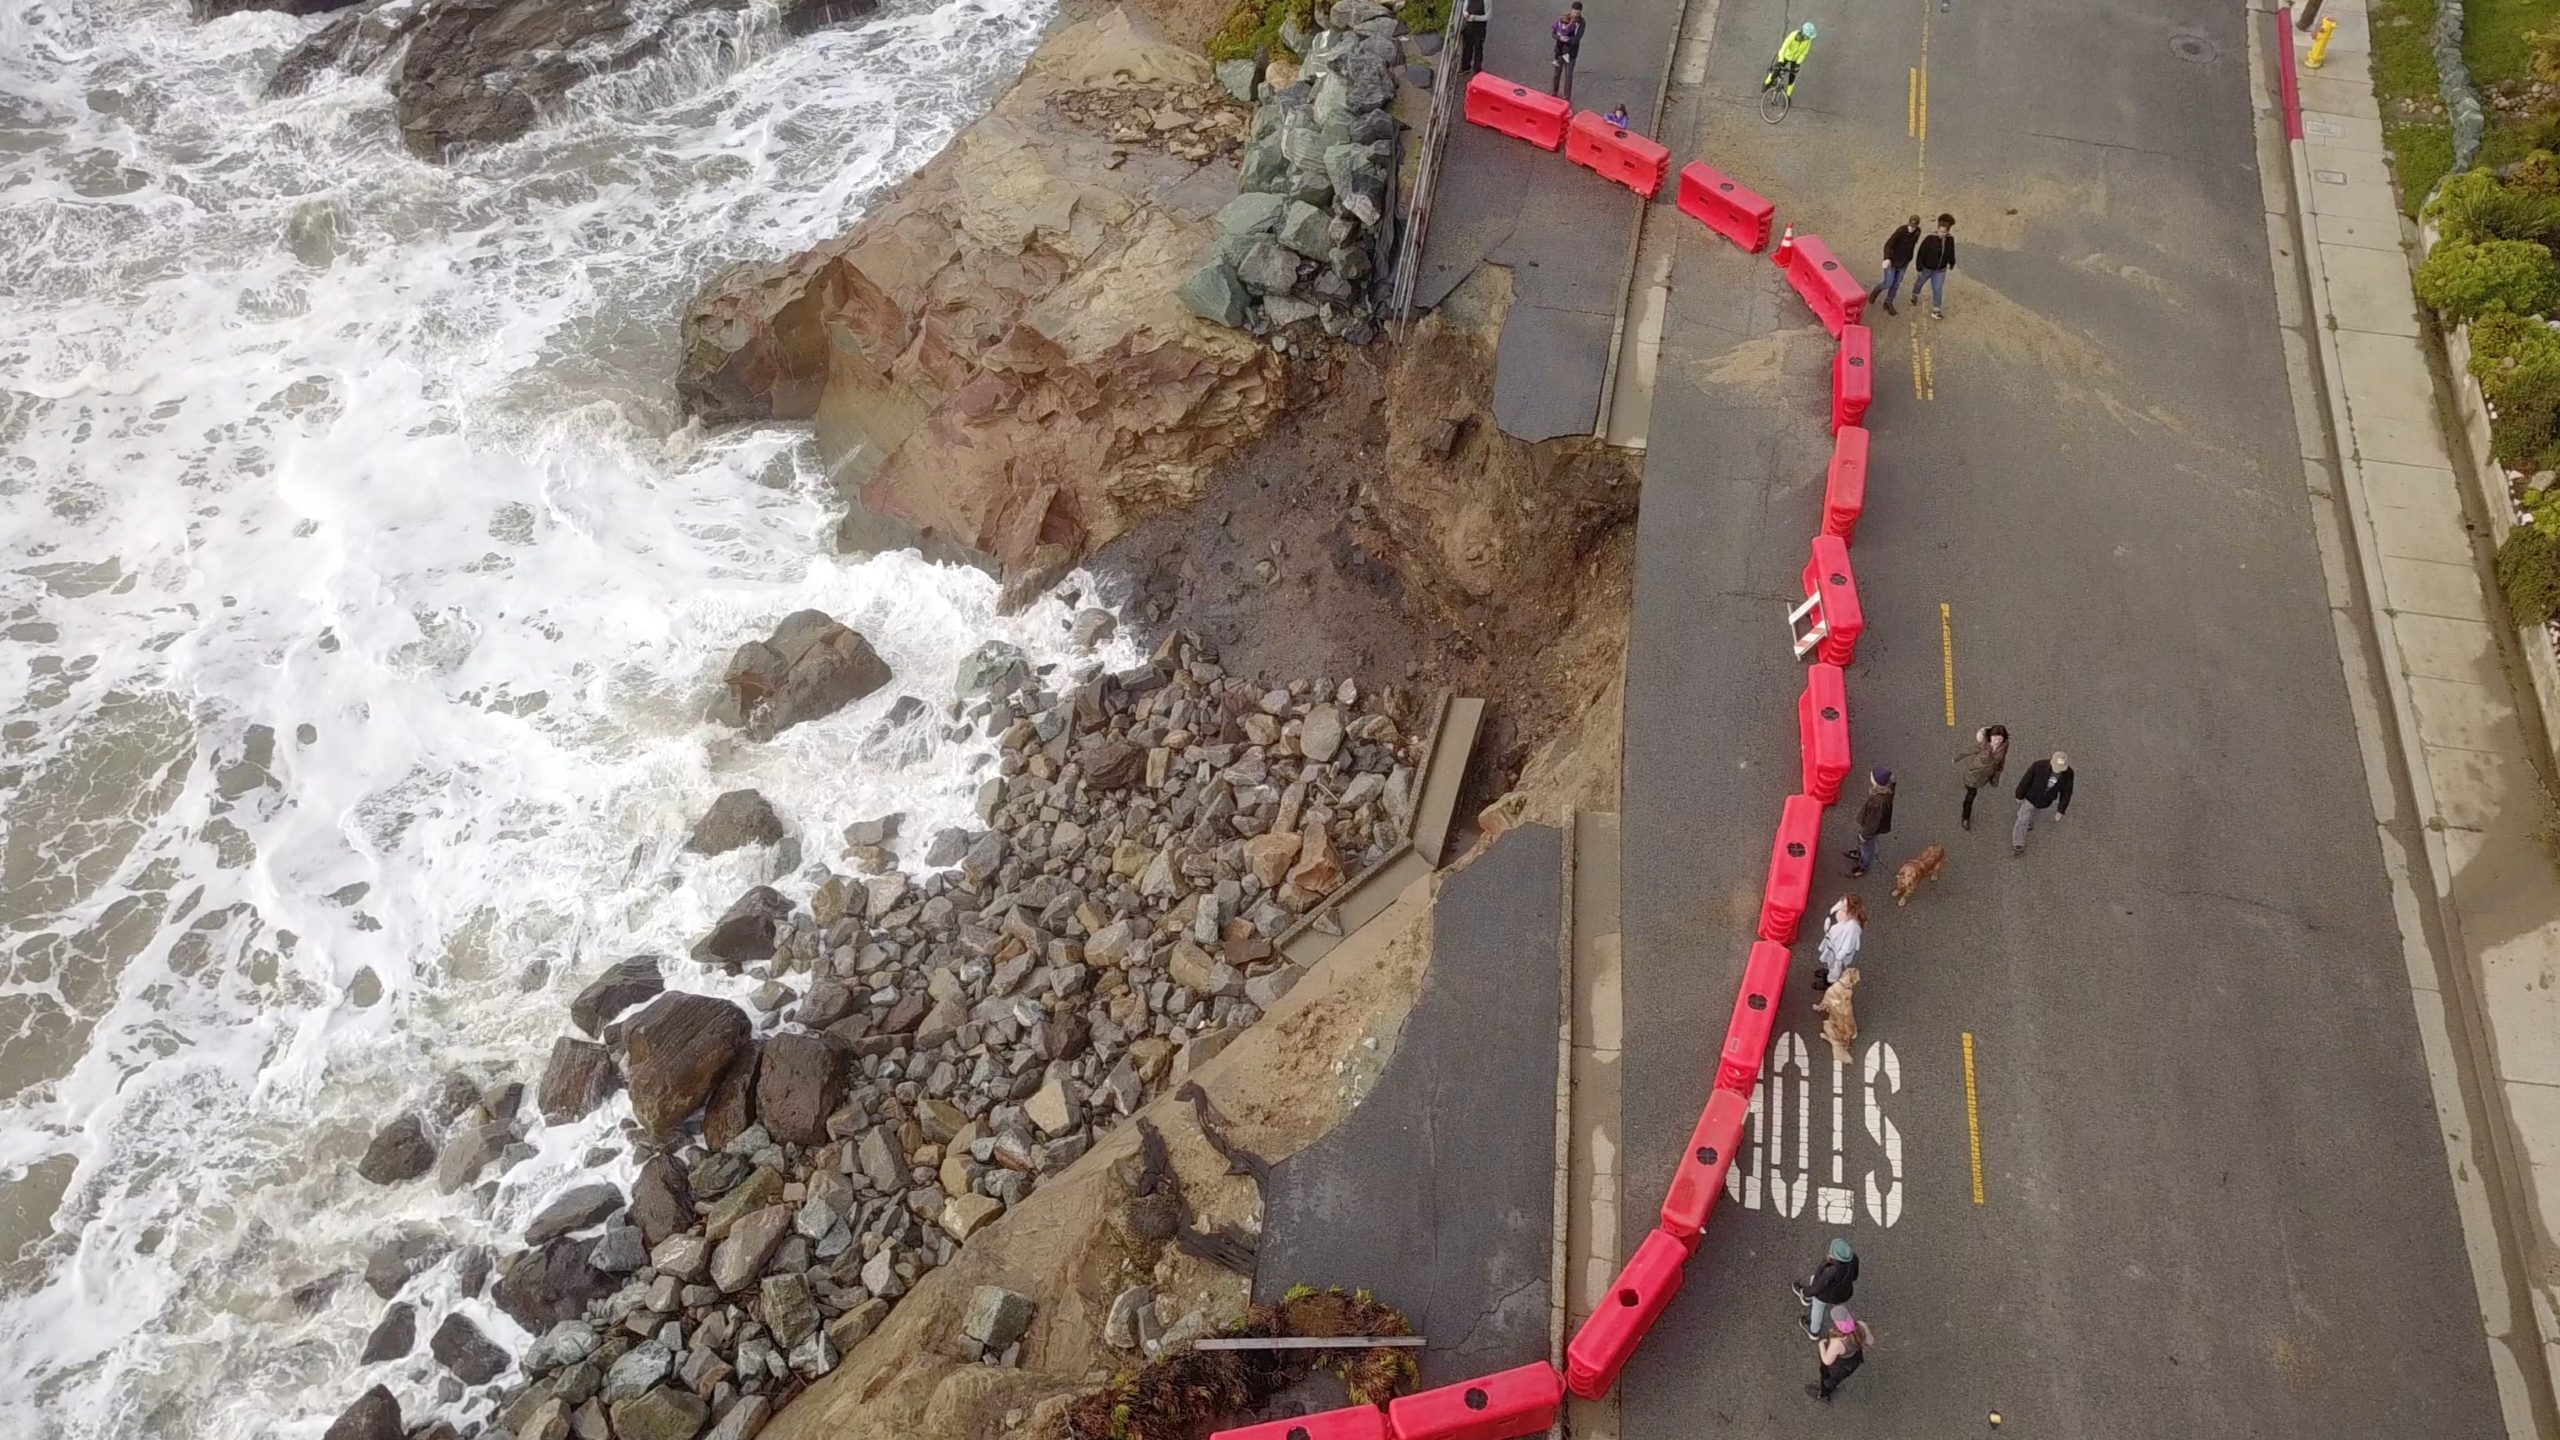 An aerial view shows damage to West Cliff Drive after winter storms in January 2023.